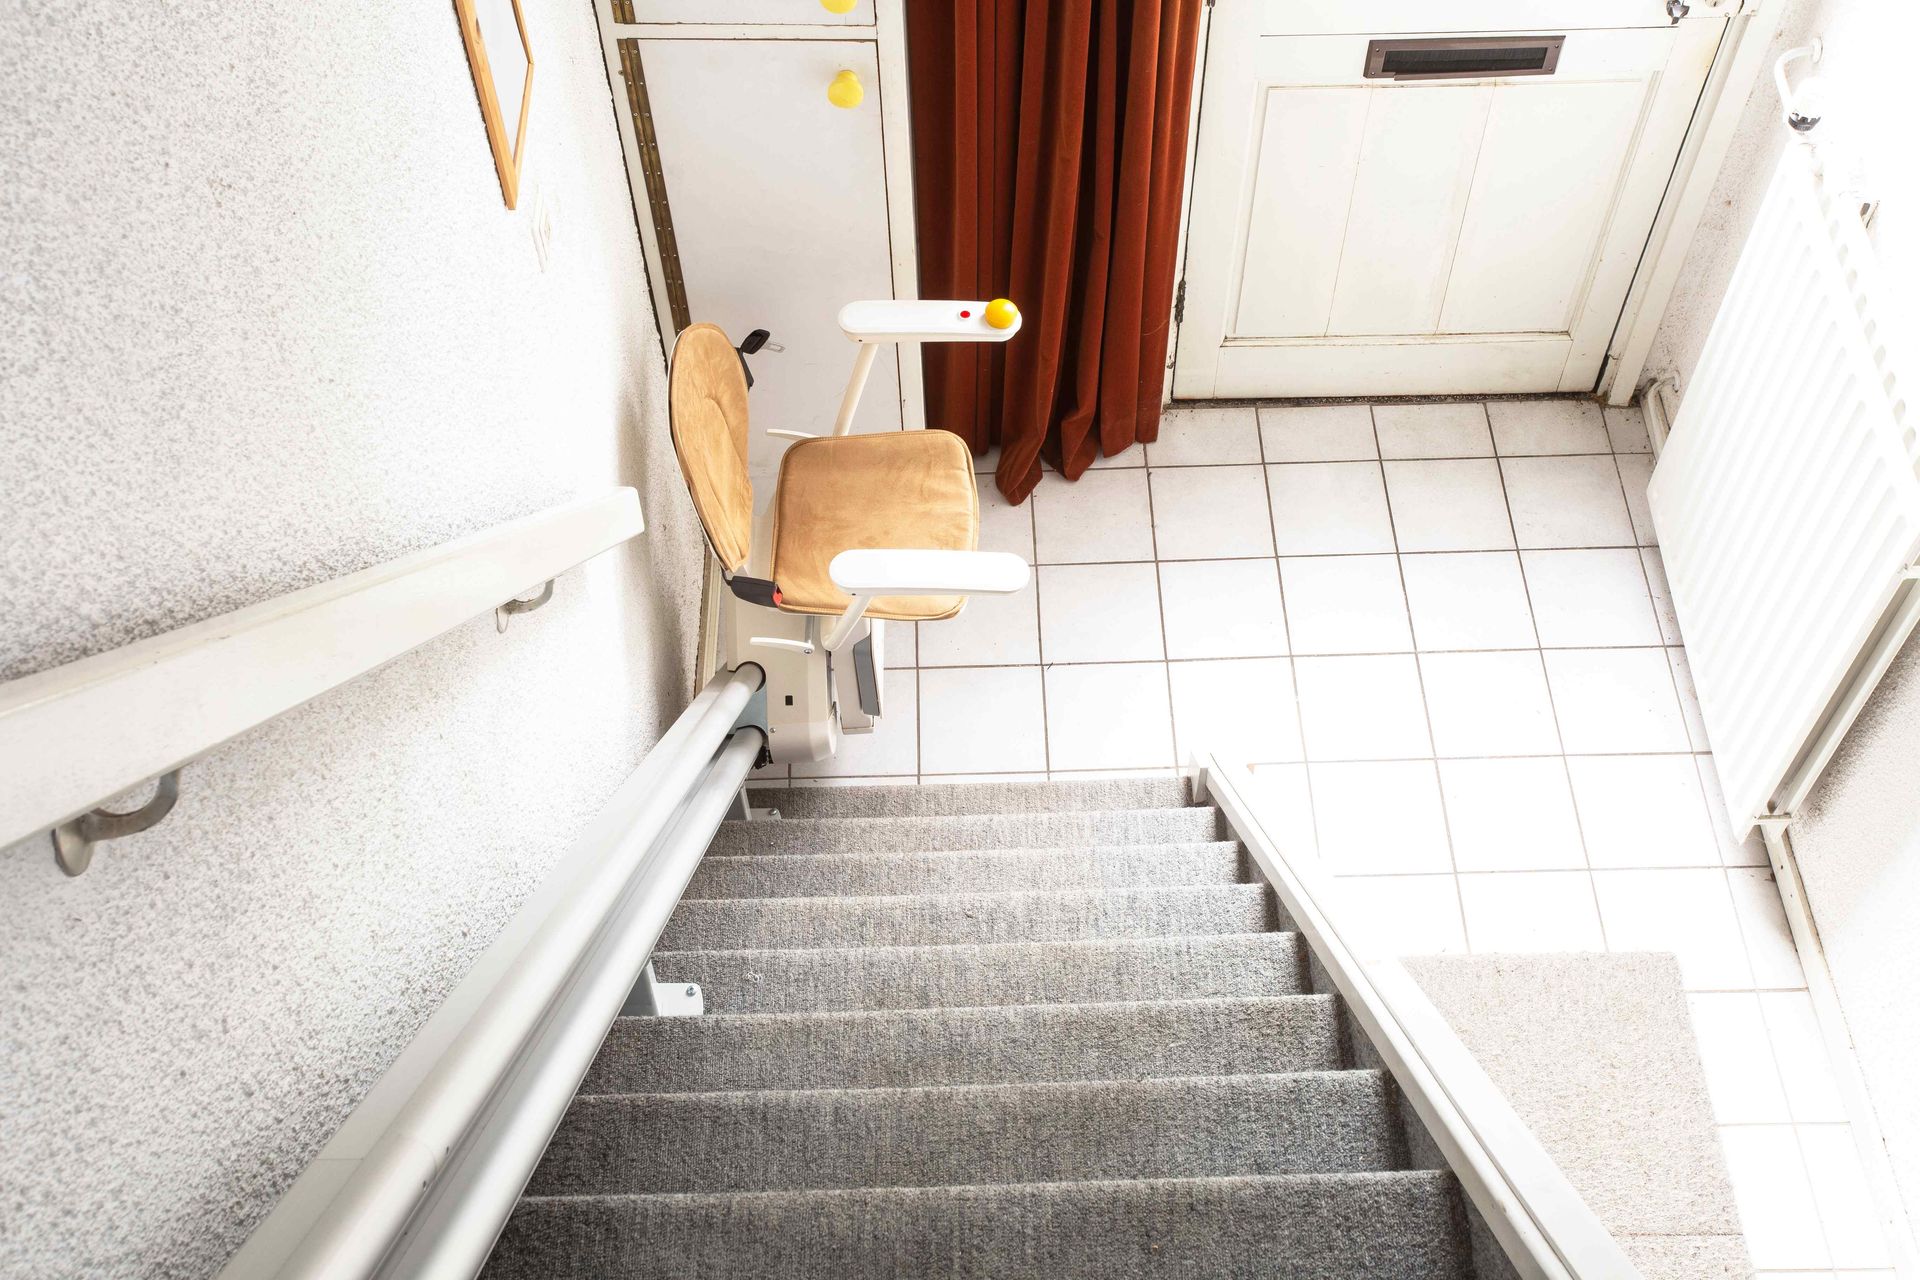 A stairlift sits at the entrance to a home, ready to usher a passenger up the stairs.